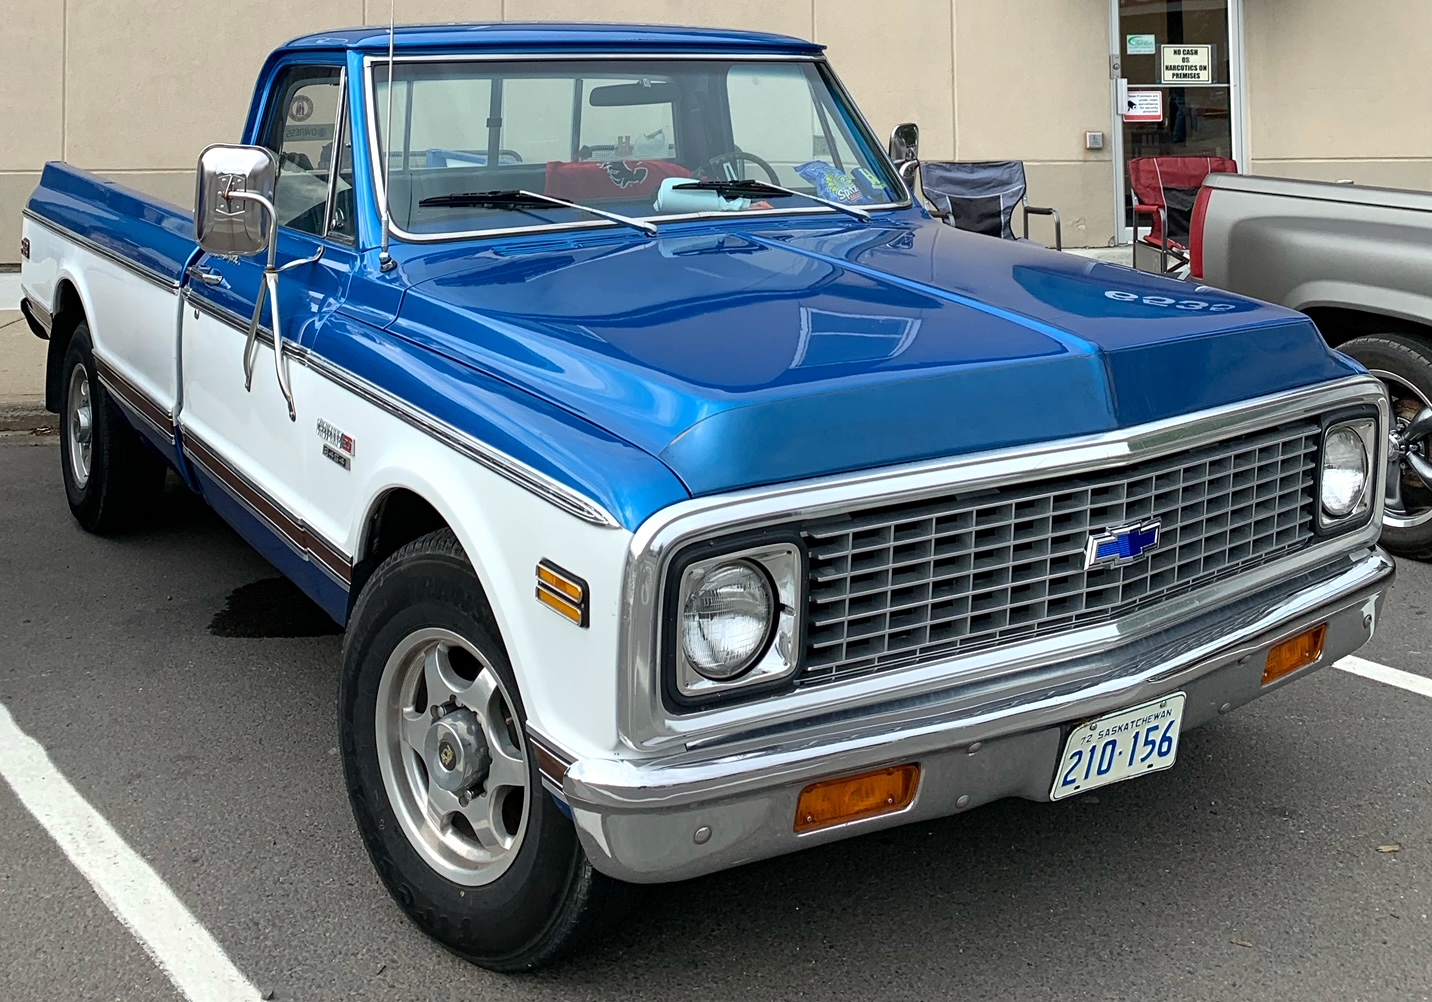 2019-image-72-Chev-Camper-Special-at-car-show-view-2